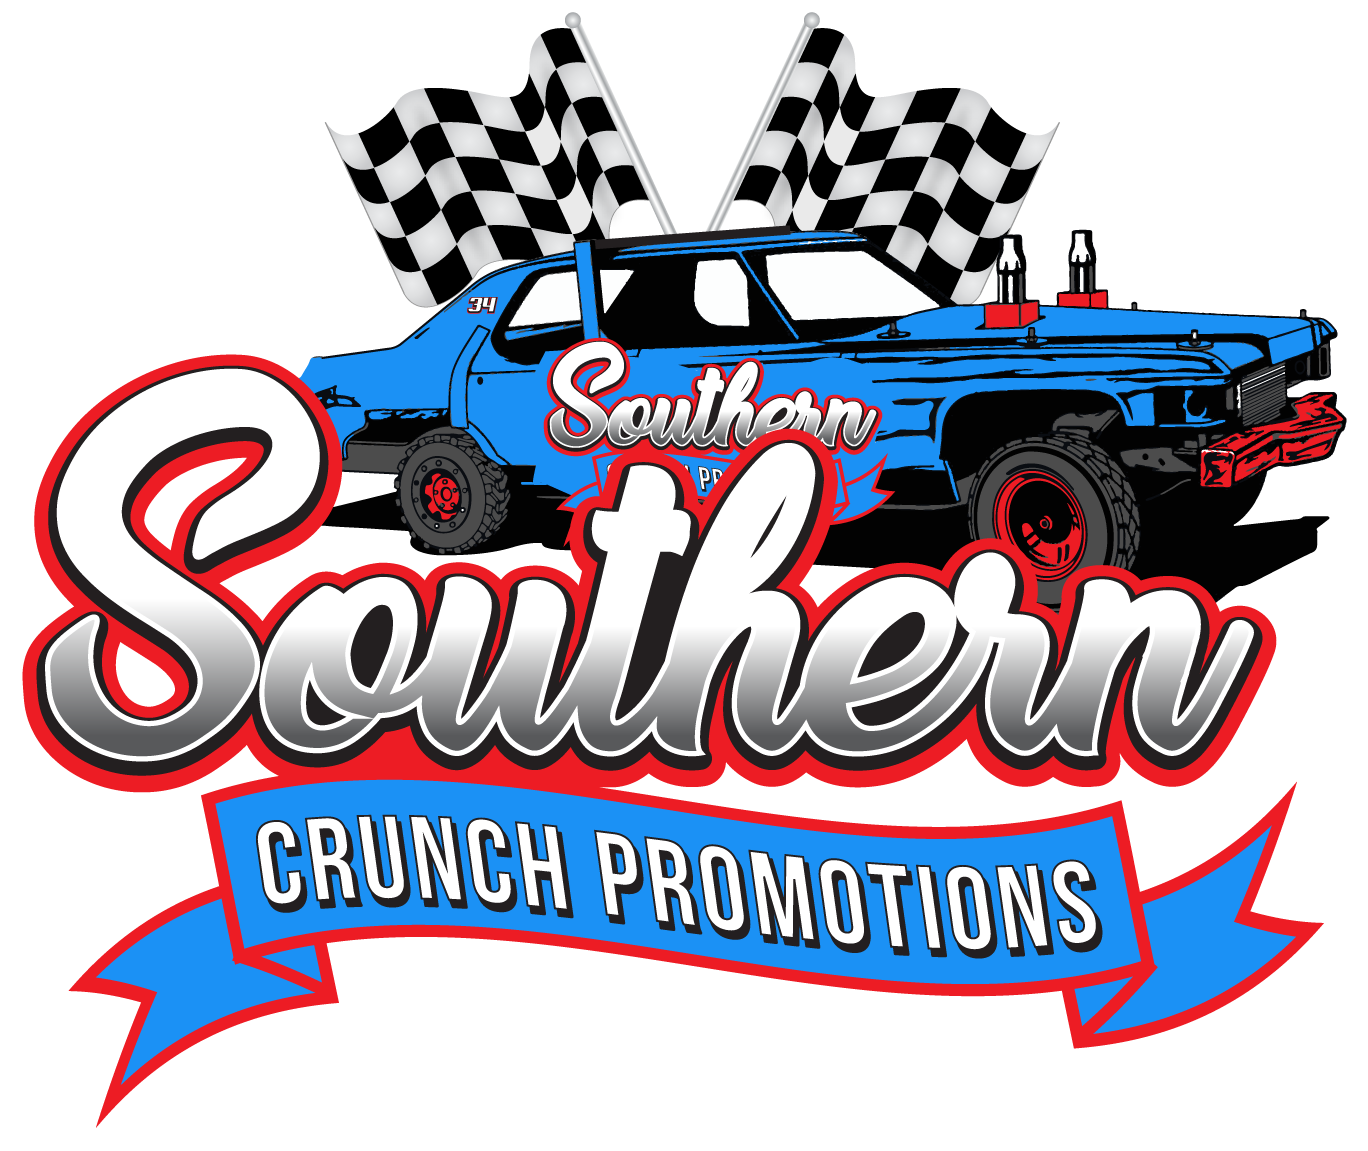 Southern Crunch Promotions